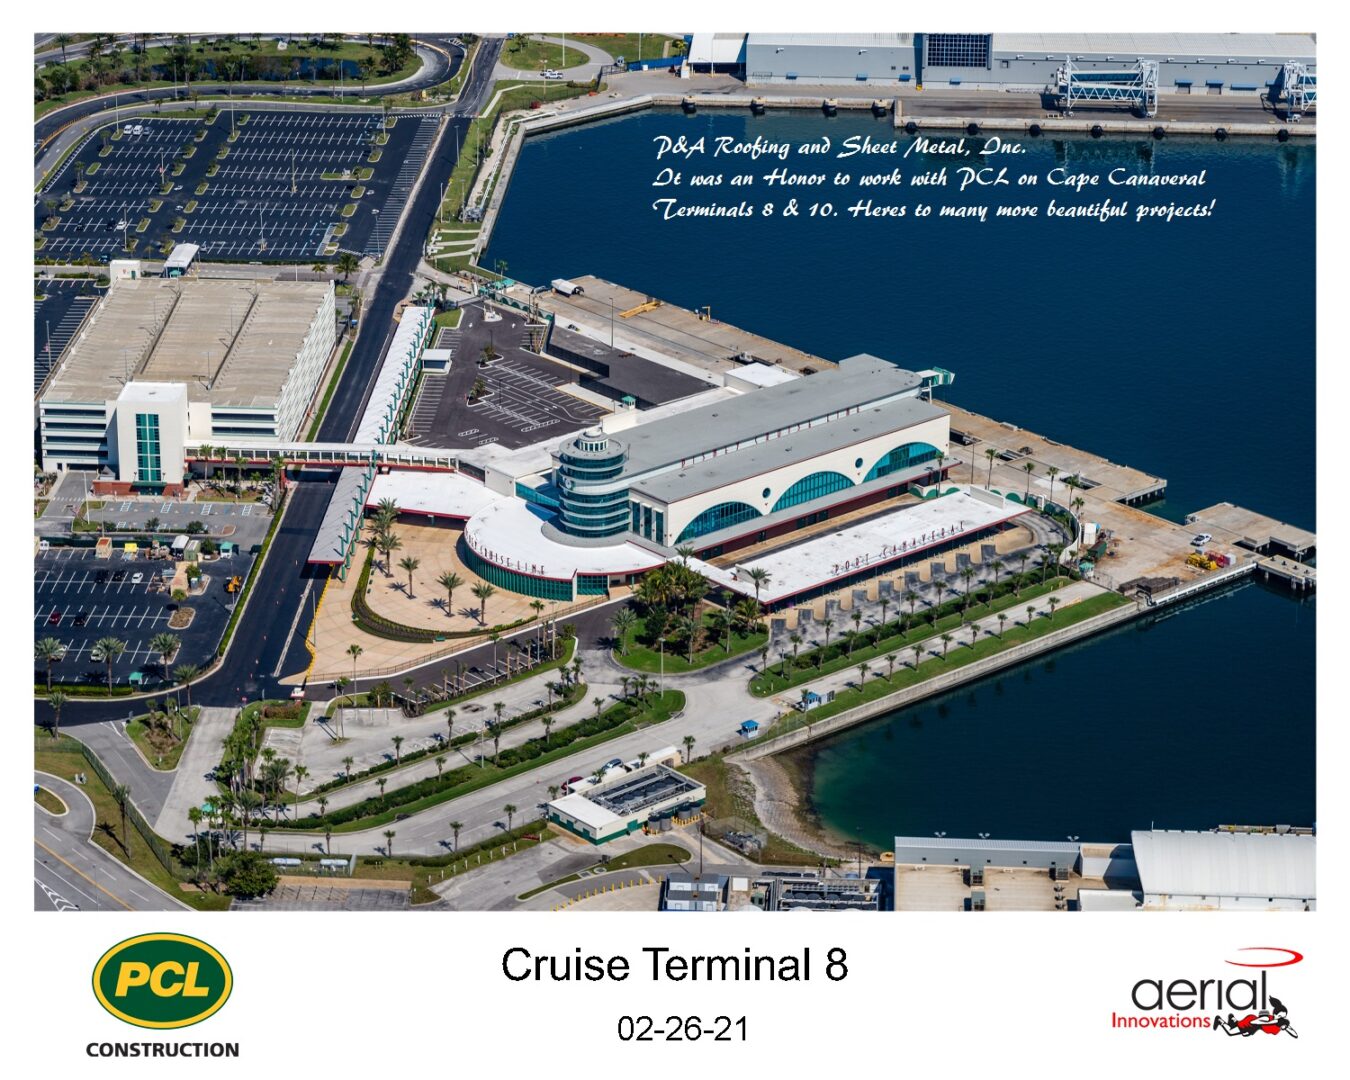 An aerial view of the cruise terminal 6, showcasing past projects.